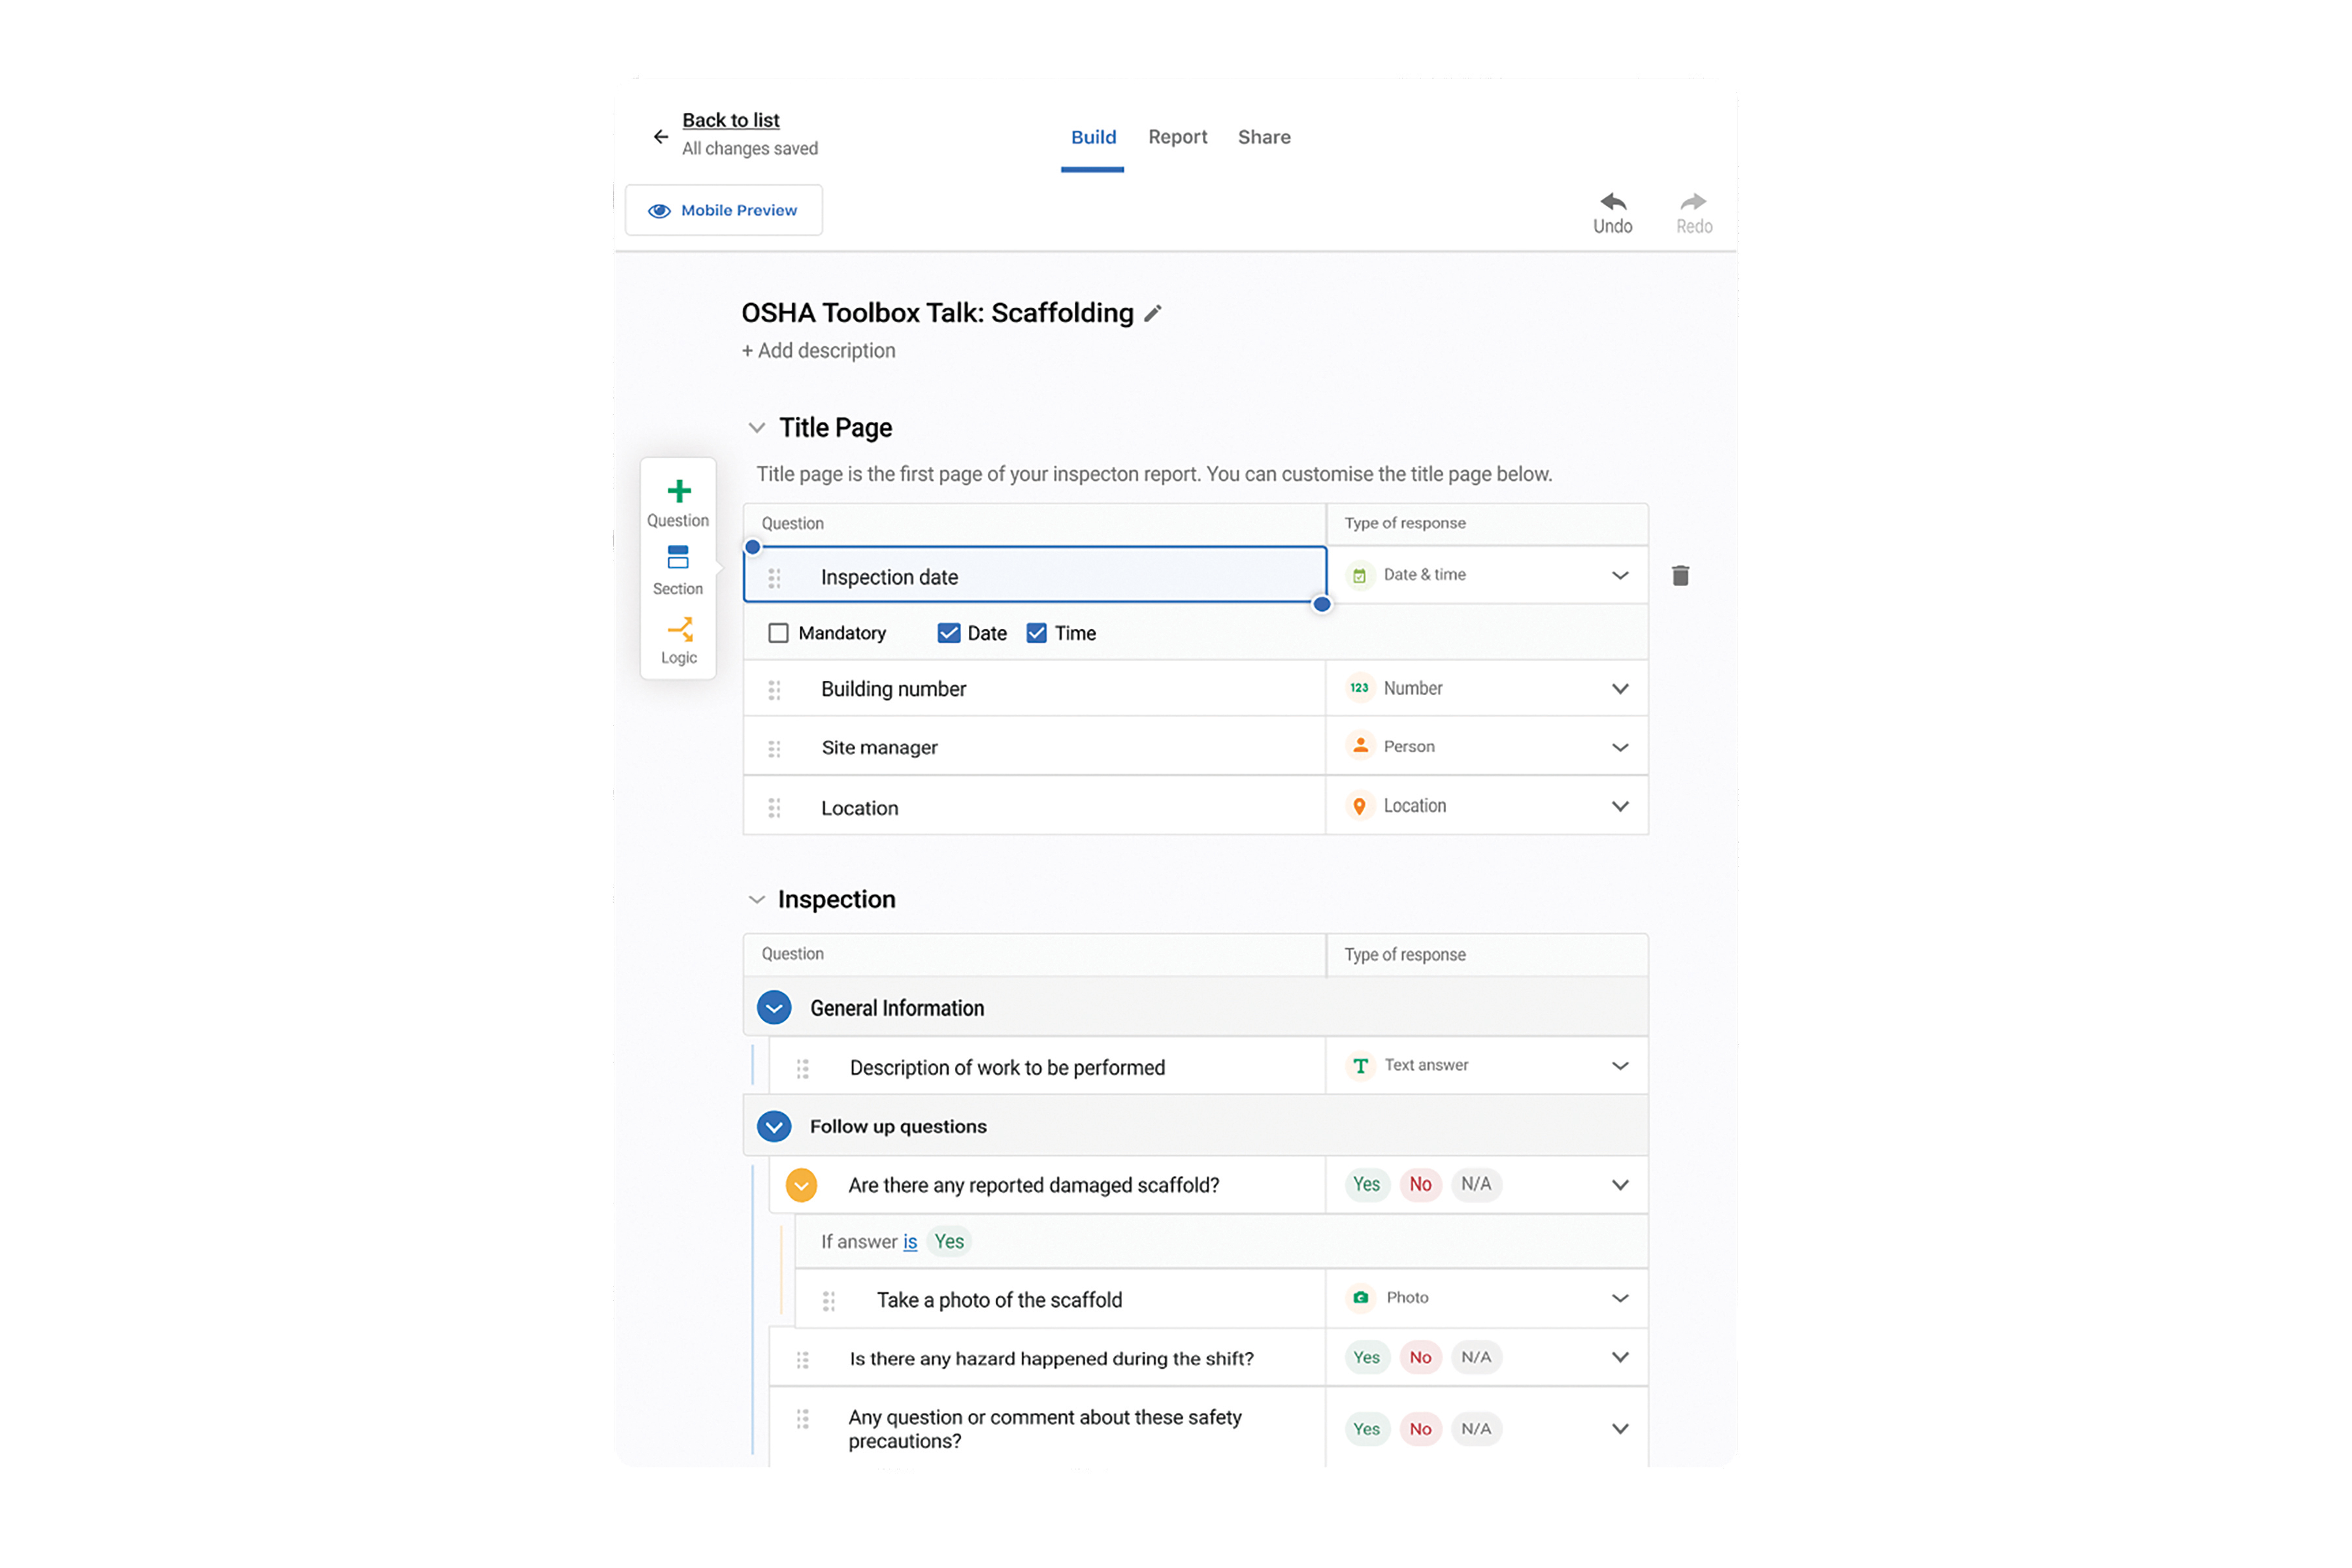 Homepage with Build, Report and Share options. Image by Safety Culture.